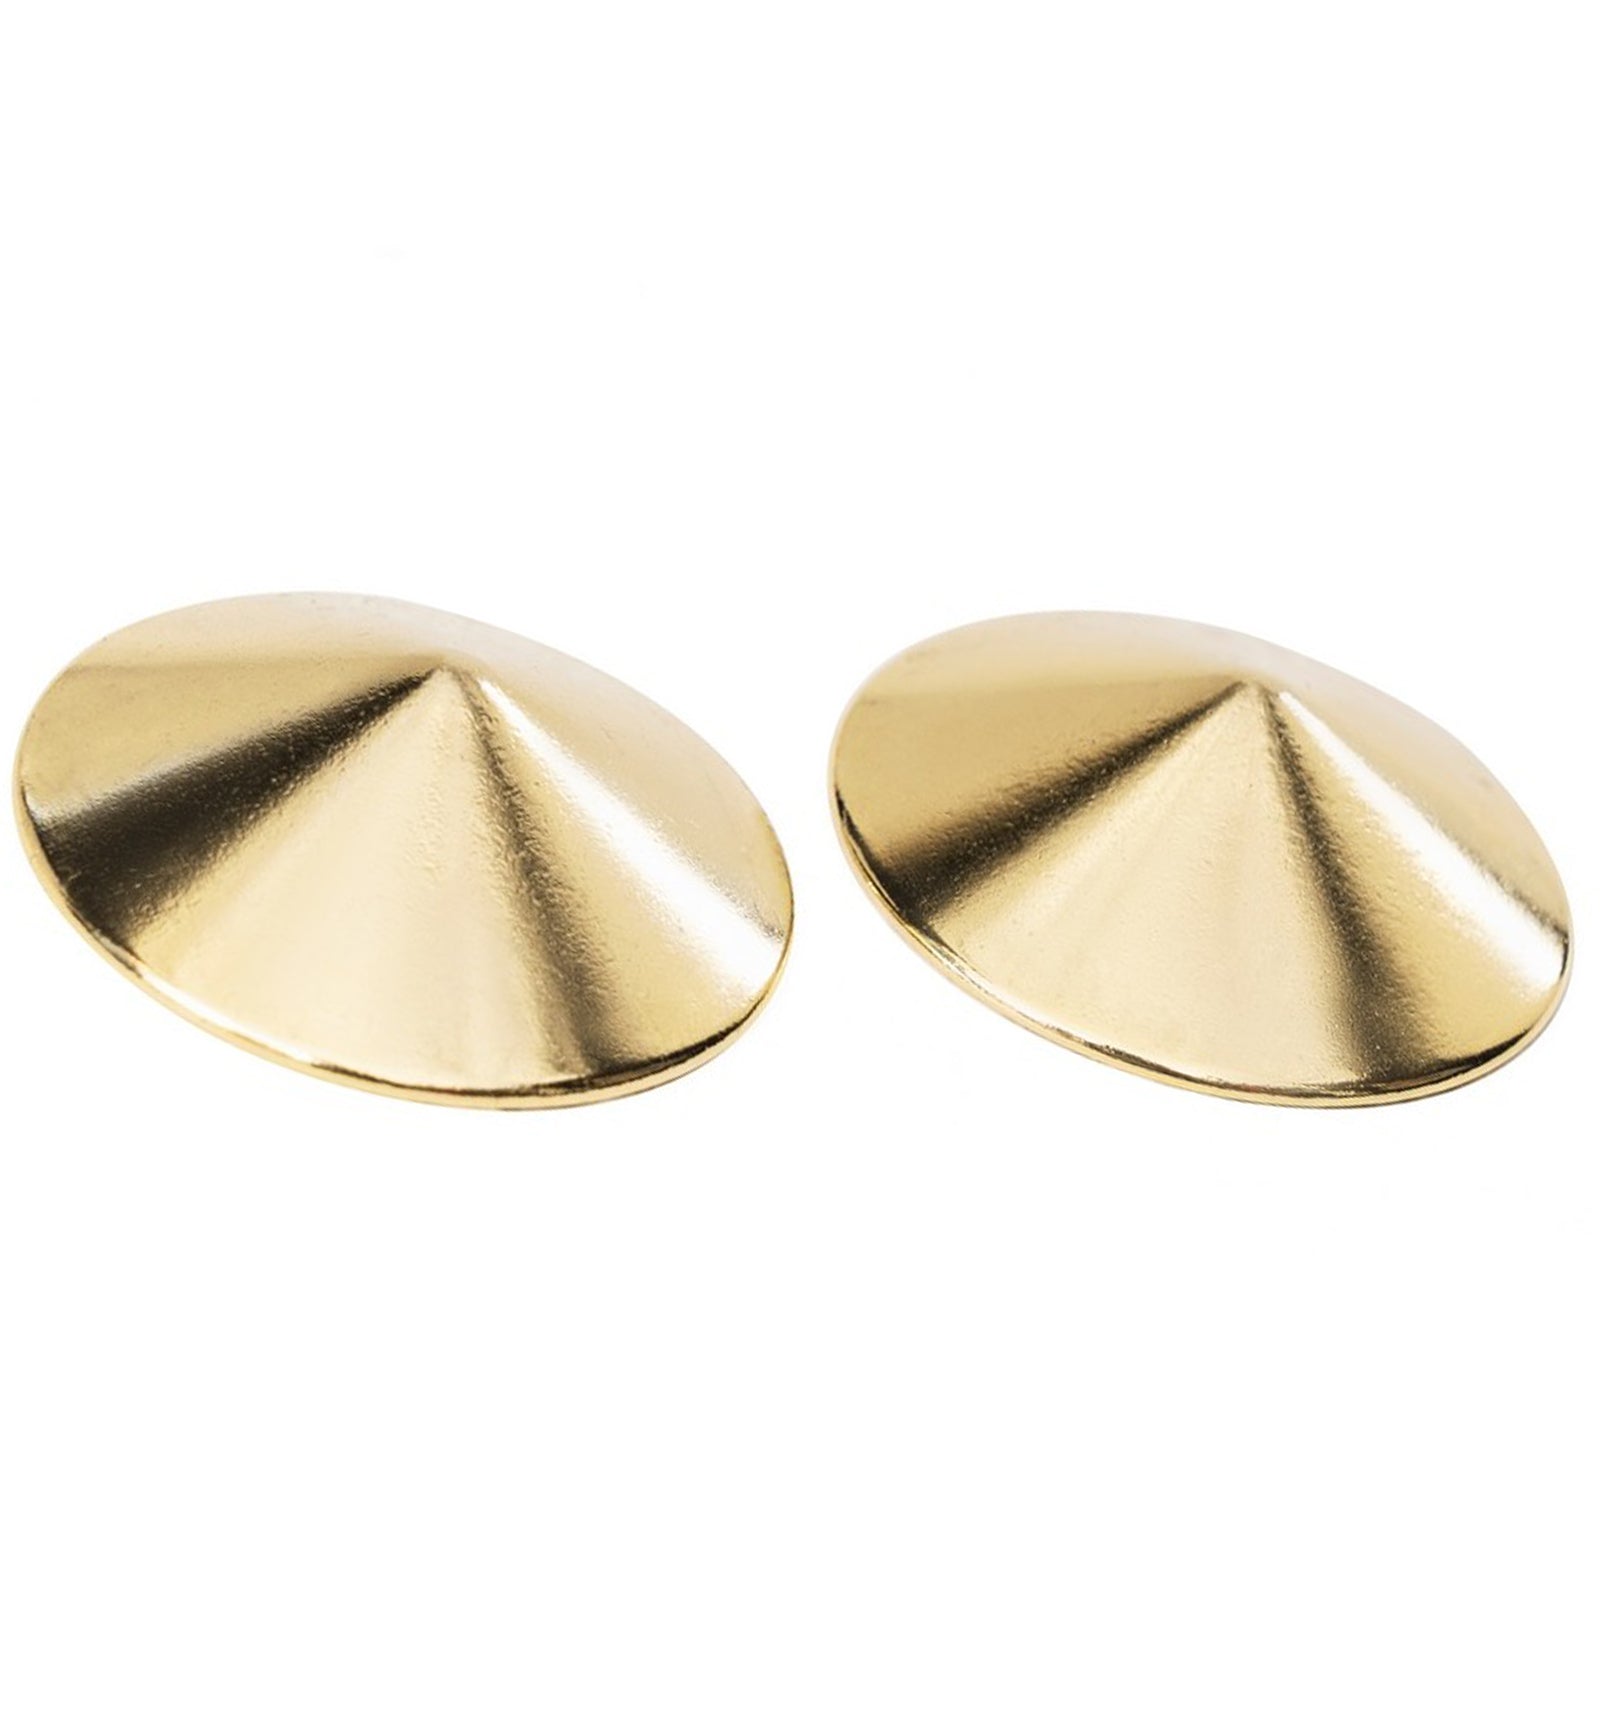 Mapale 24K Gold Plated Nipplets (999) 1 Pair- Gold